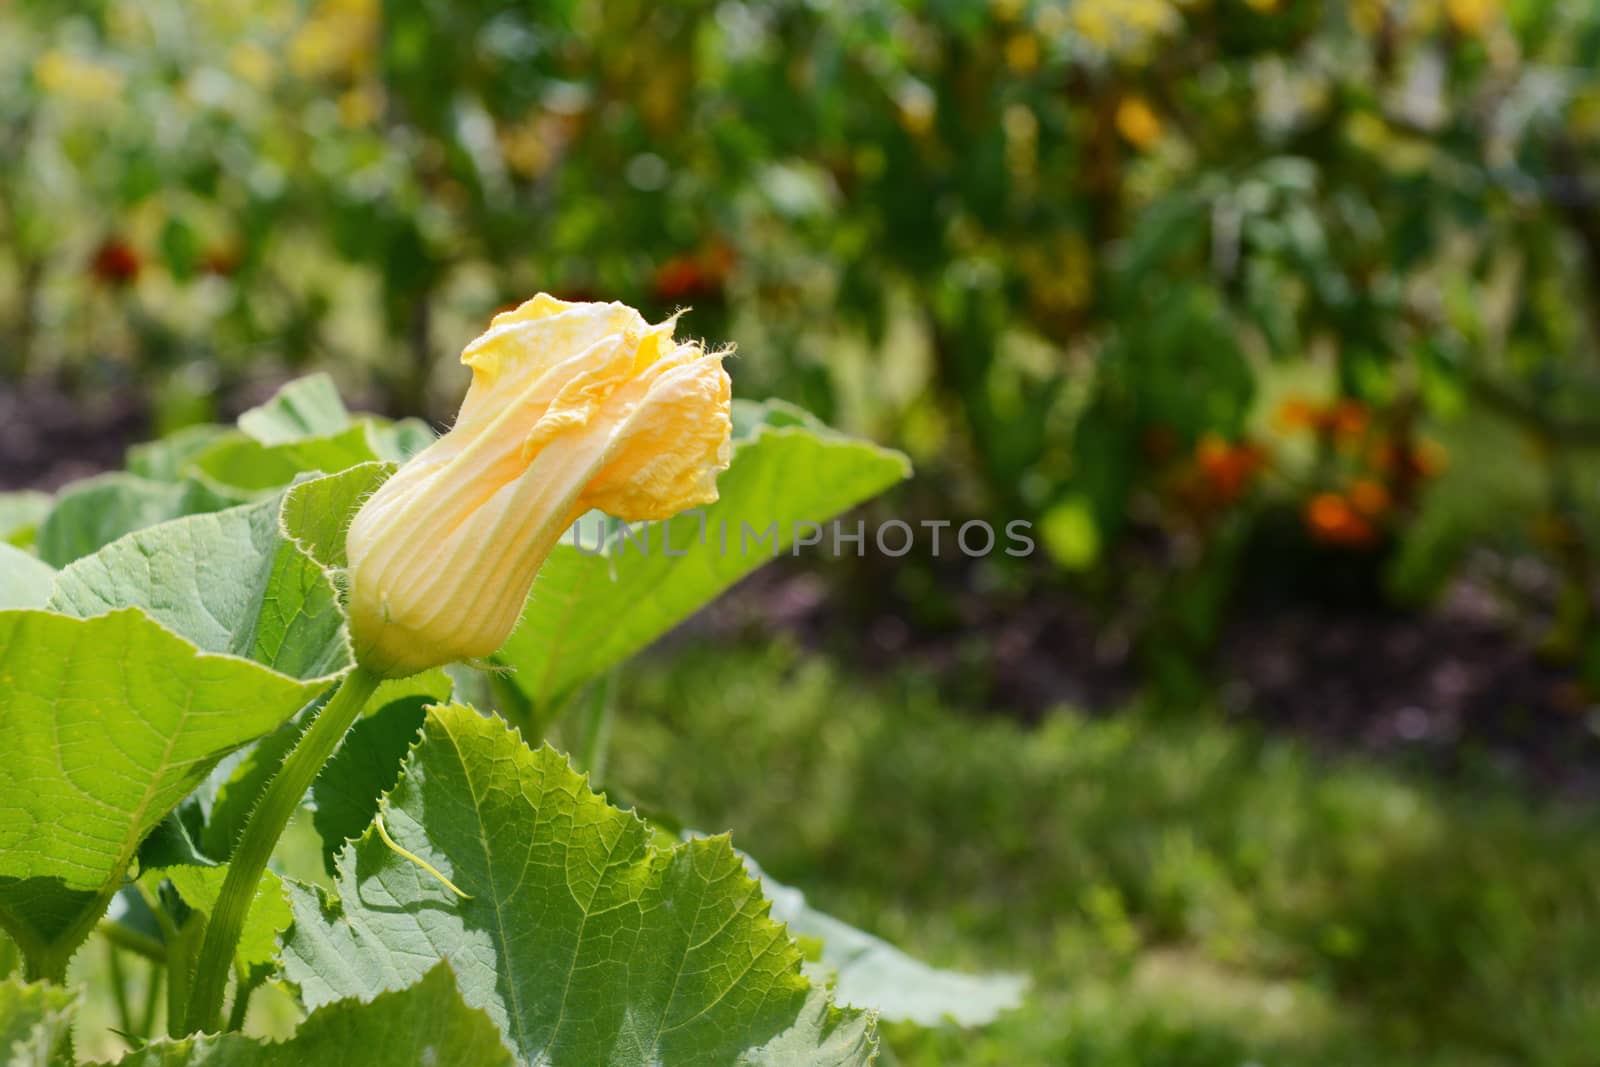 Male gourd flower grows above the lush foliage of a cucurbit plant, in selective focus against a rural vegetable garden